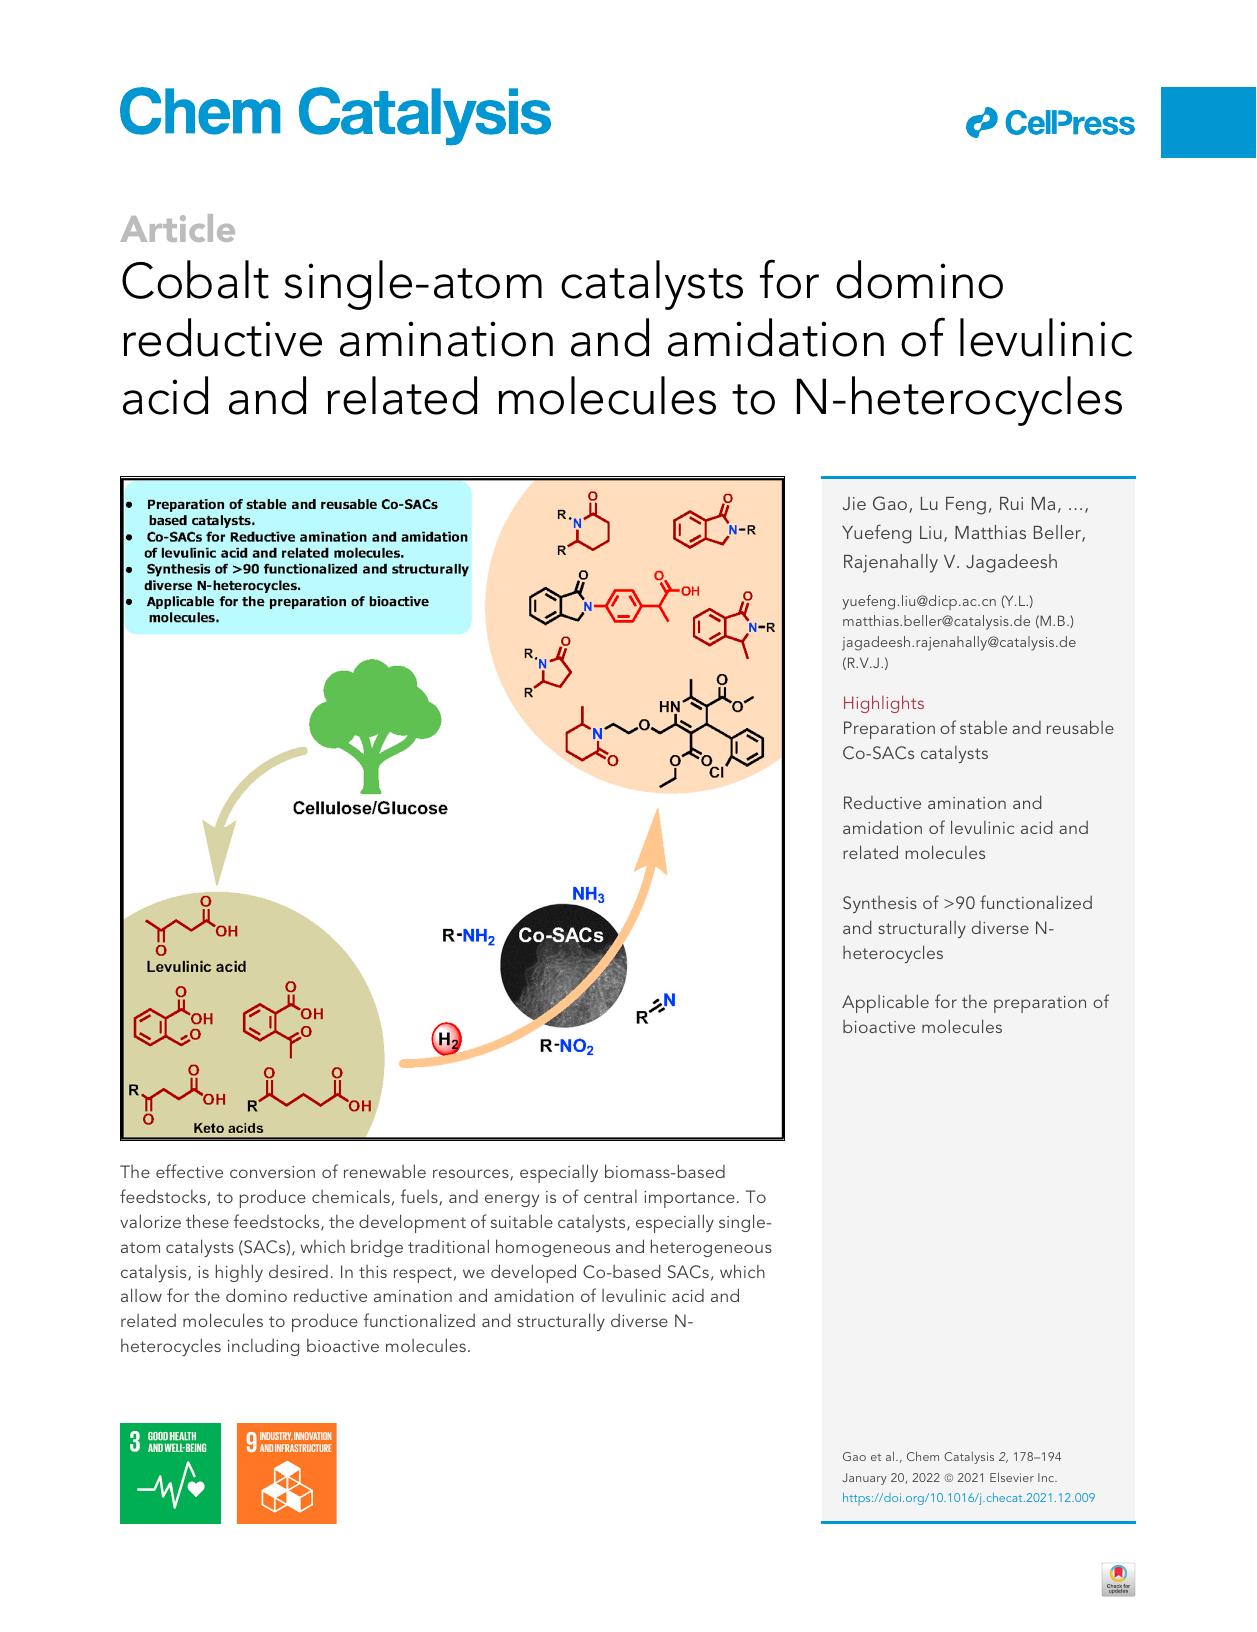 Cobalt single-atom catalysts for domino reductive amination and amidation of levulinic acid and related molecules to N-heterocycles by unknow